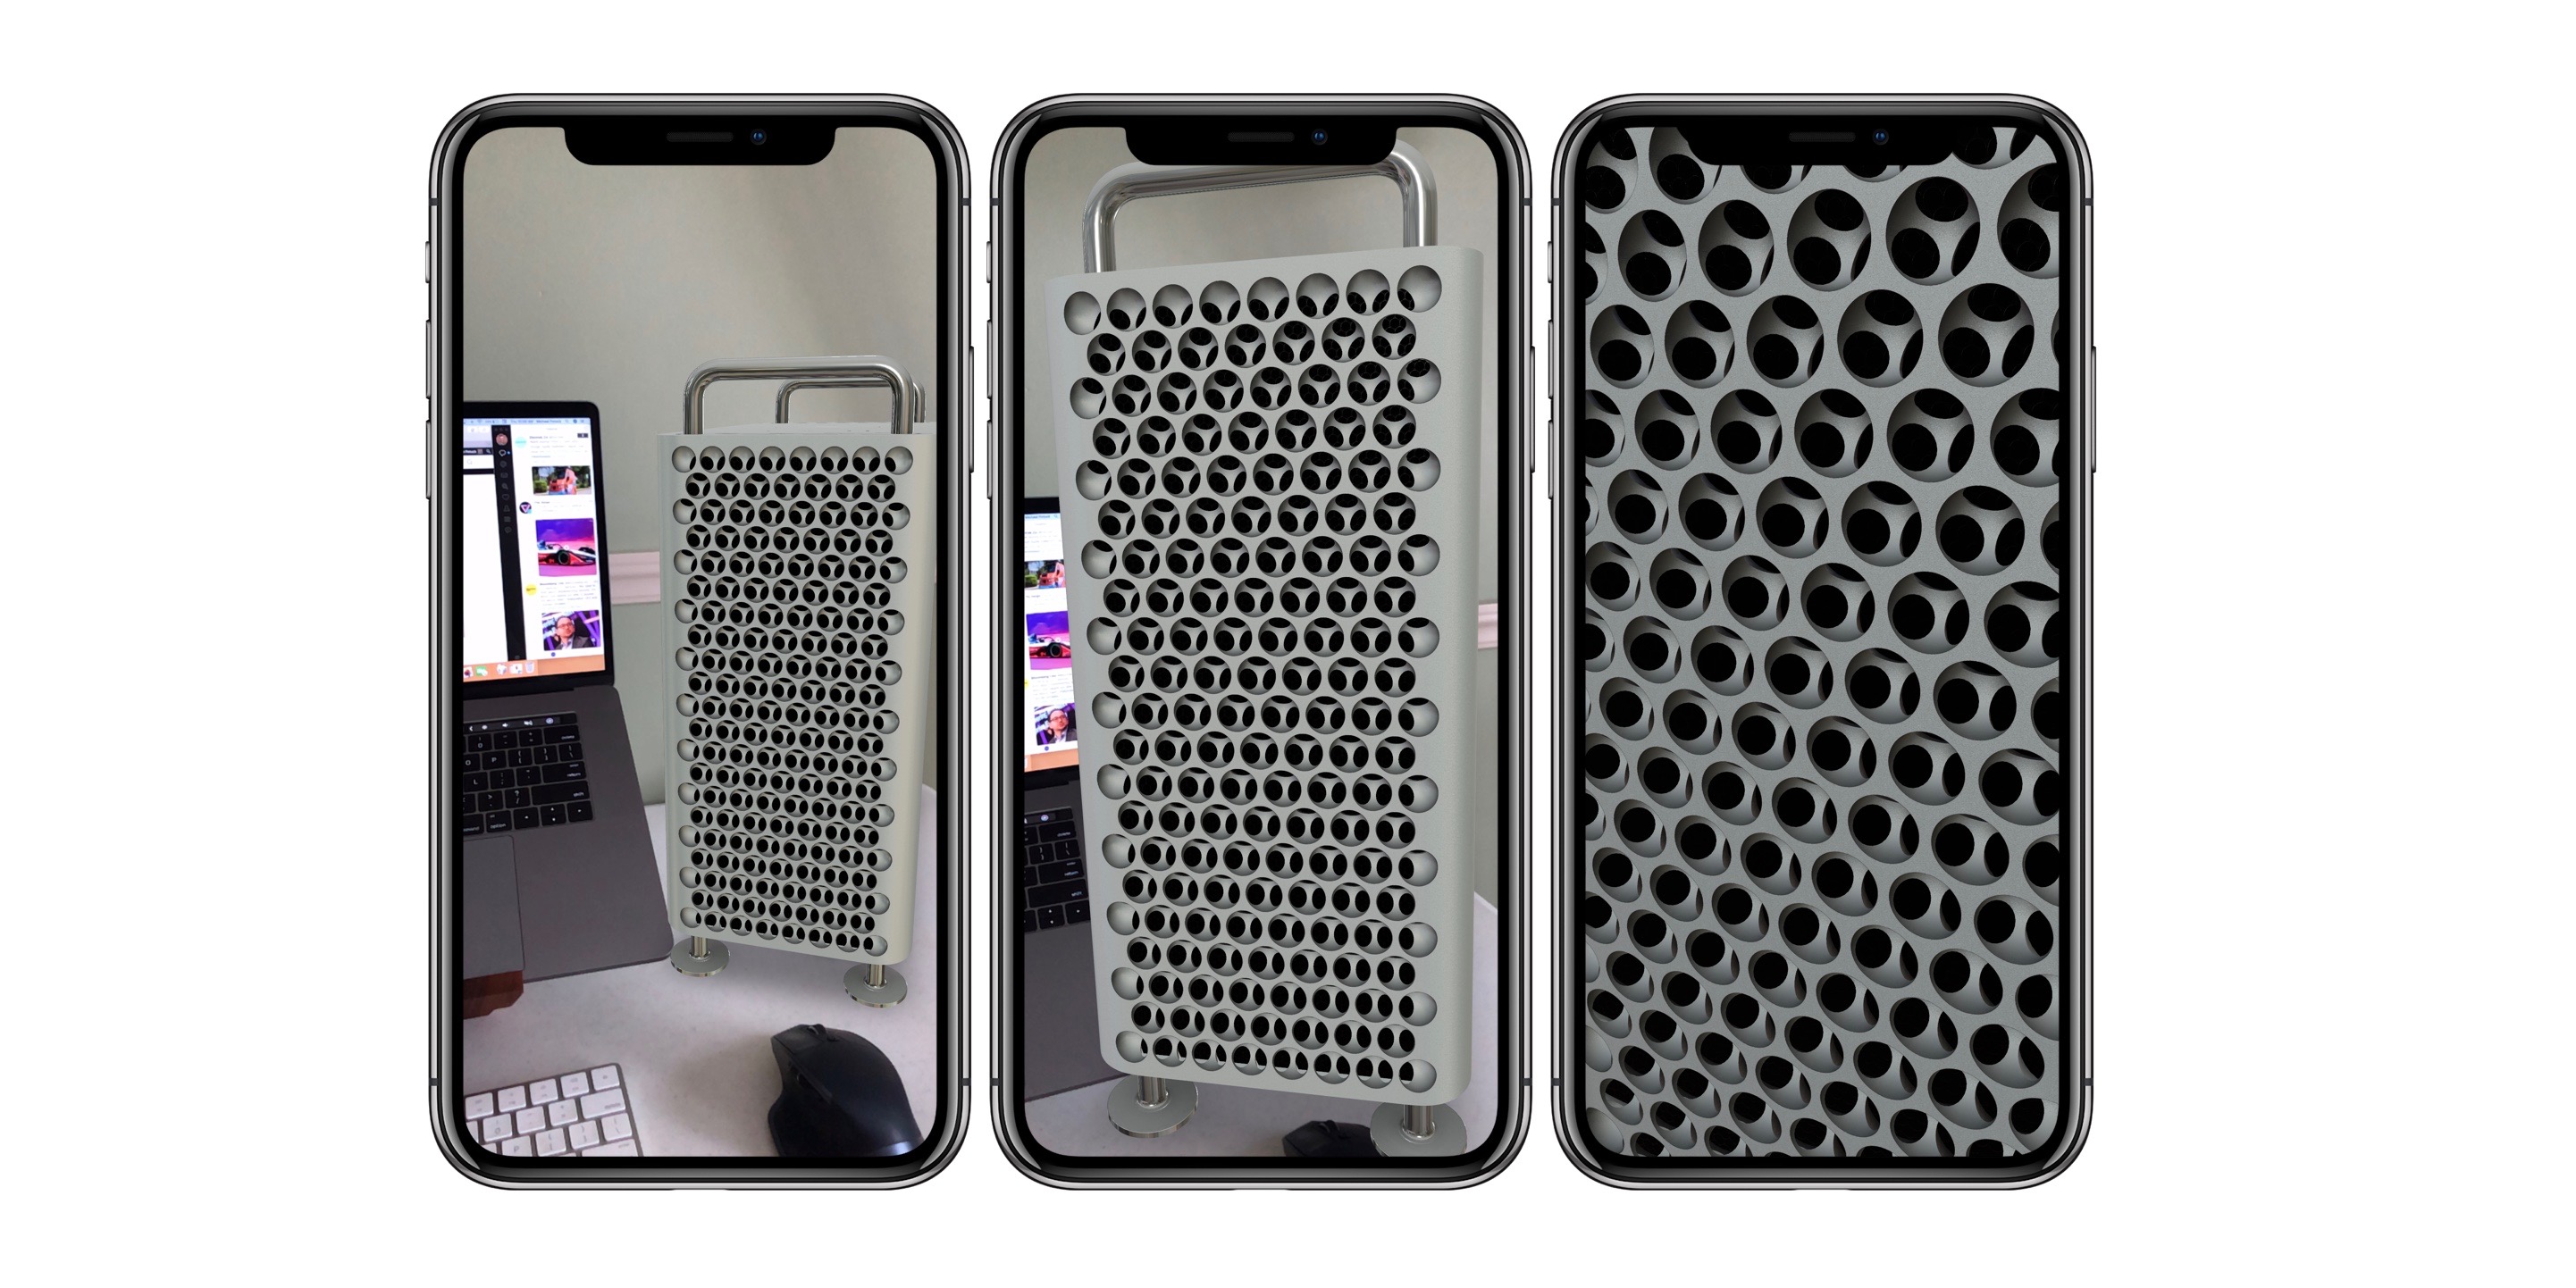 Apple's Mac Pro AR tool is great for